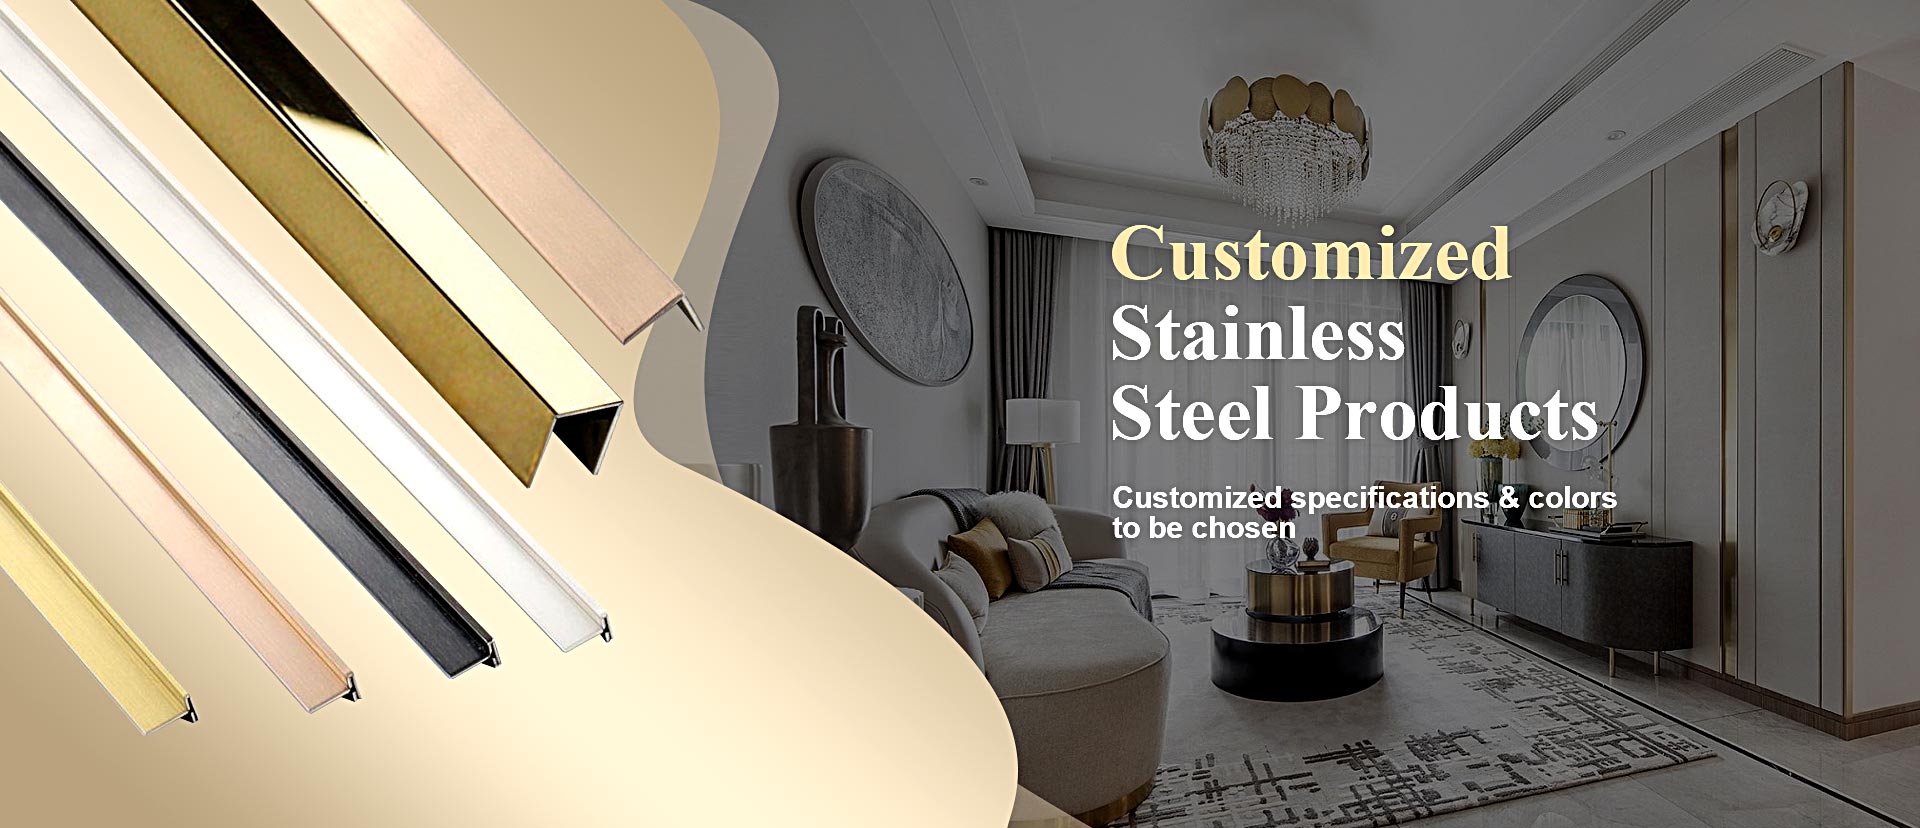 CustomizedStainlessSteel Products